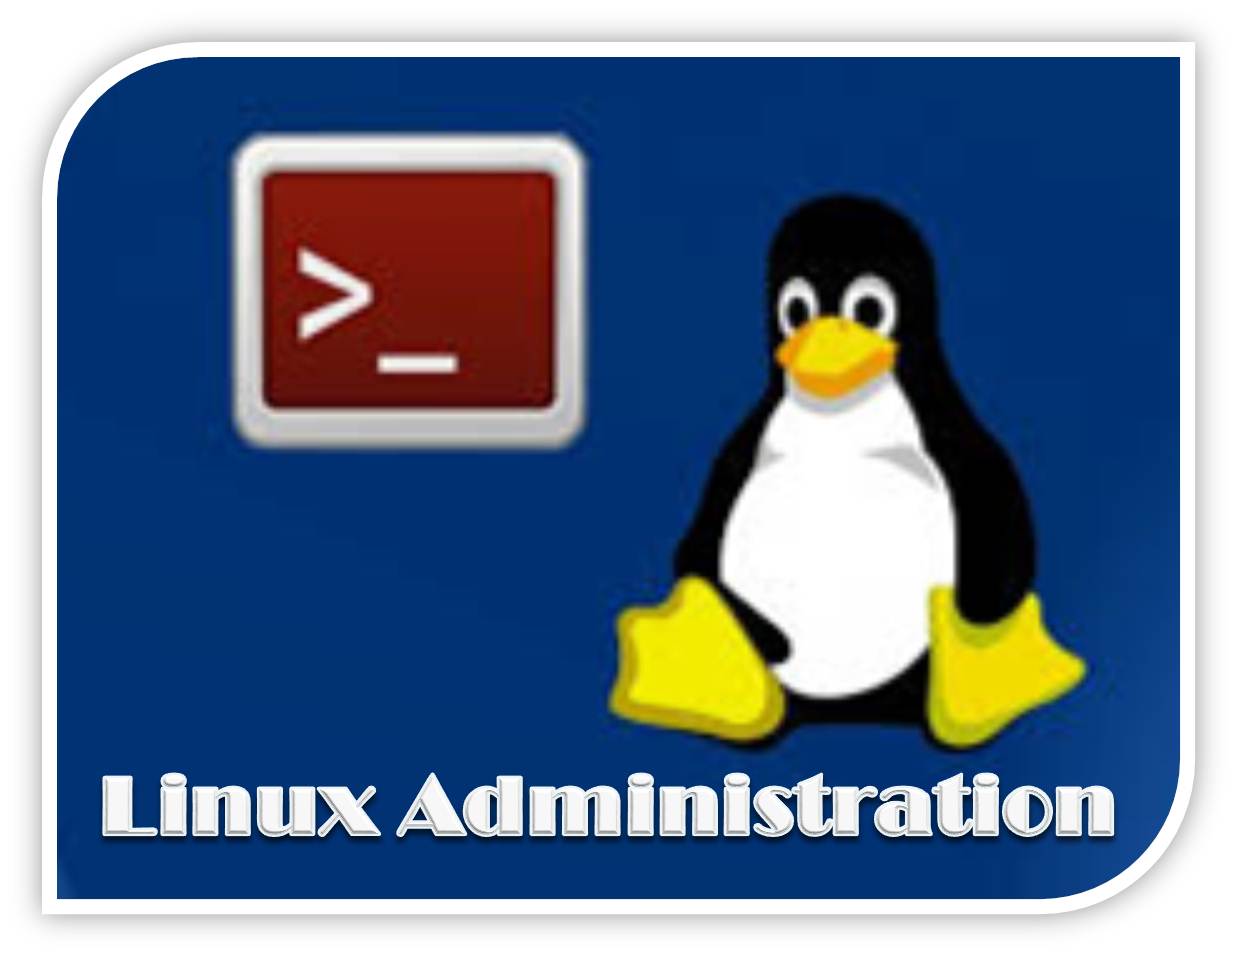 http://study.aisectonline.com/images/Linux Administration.jpg